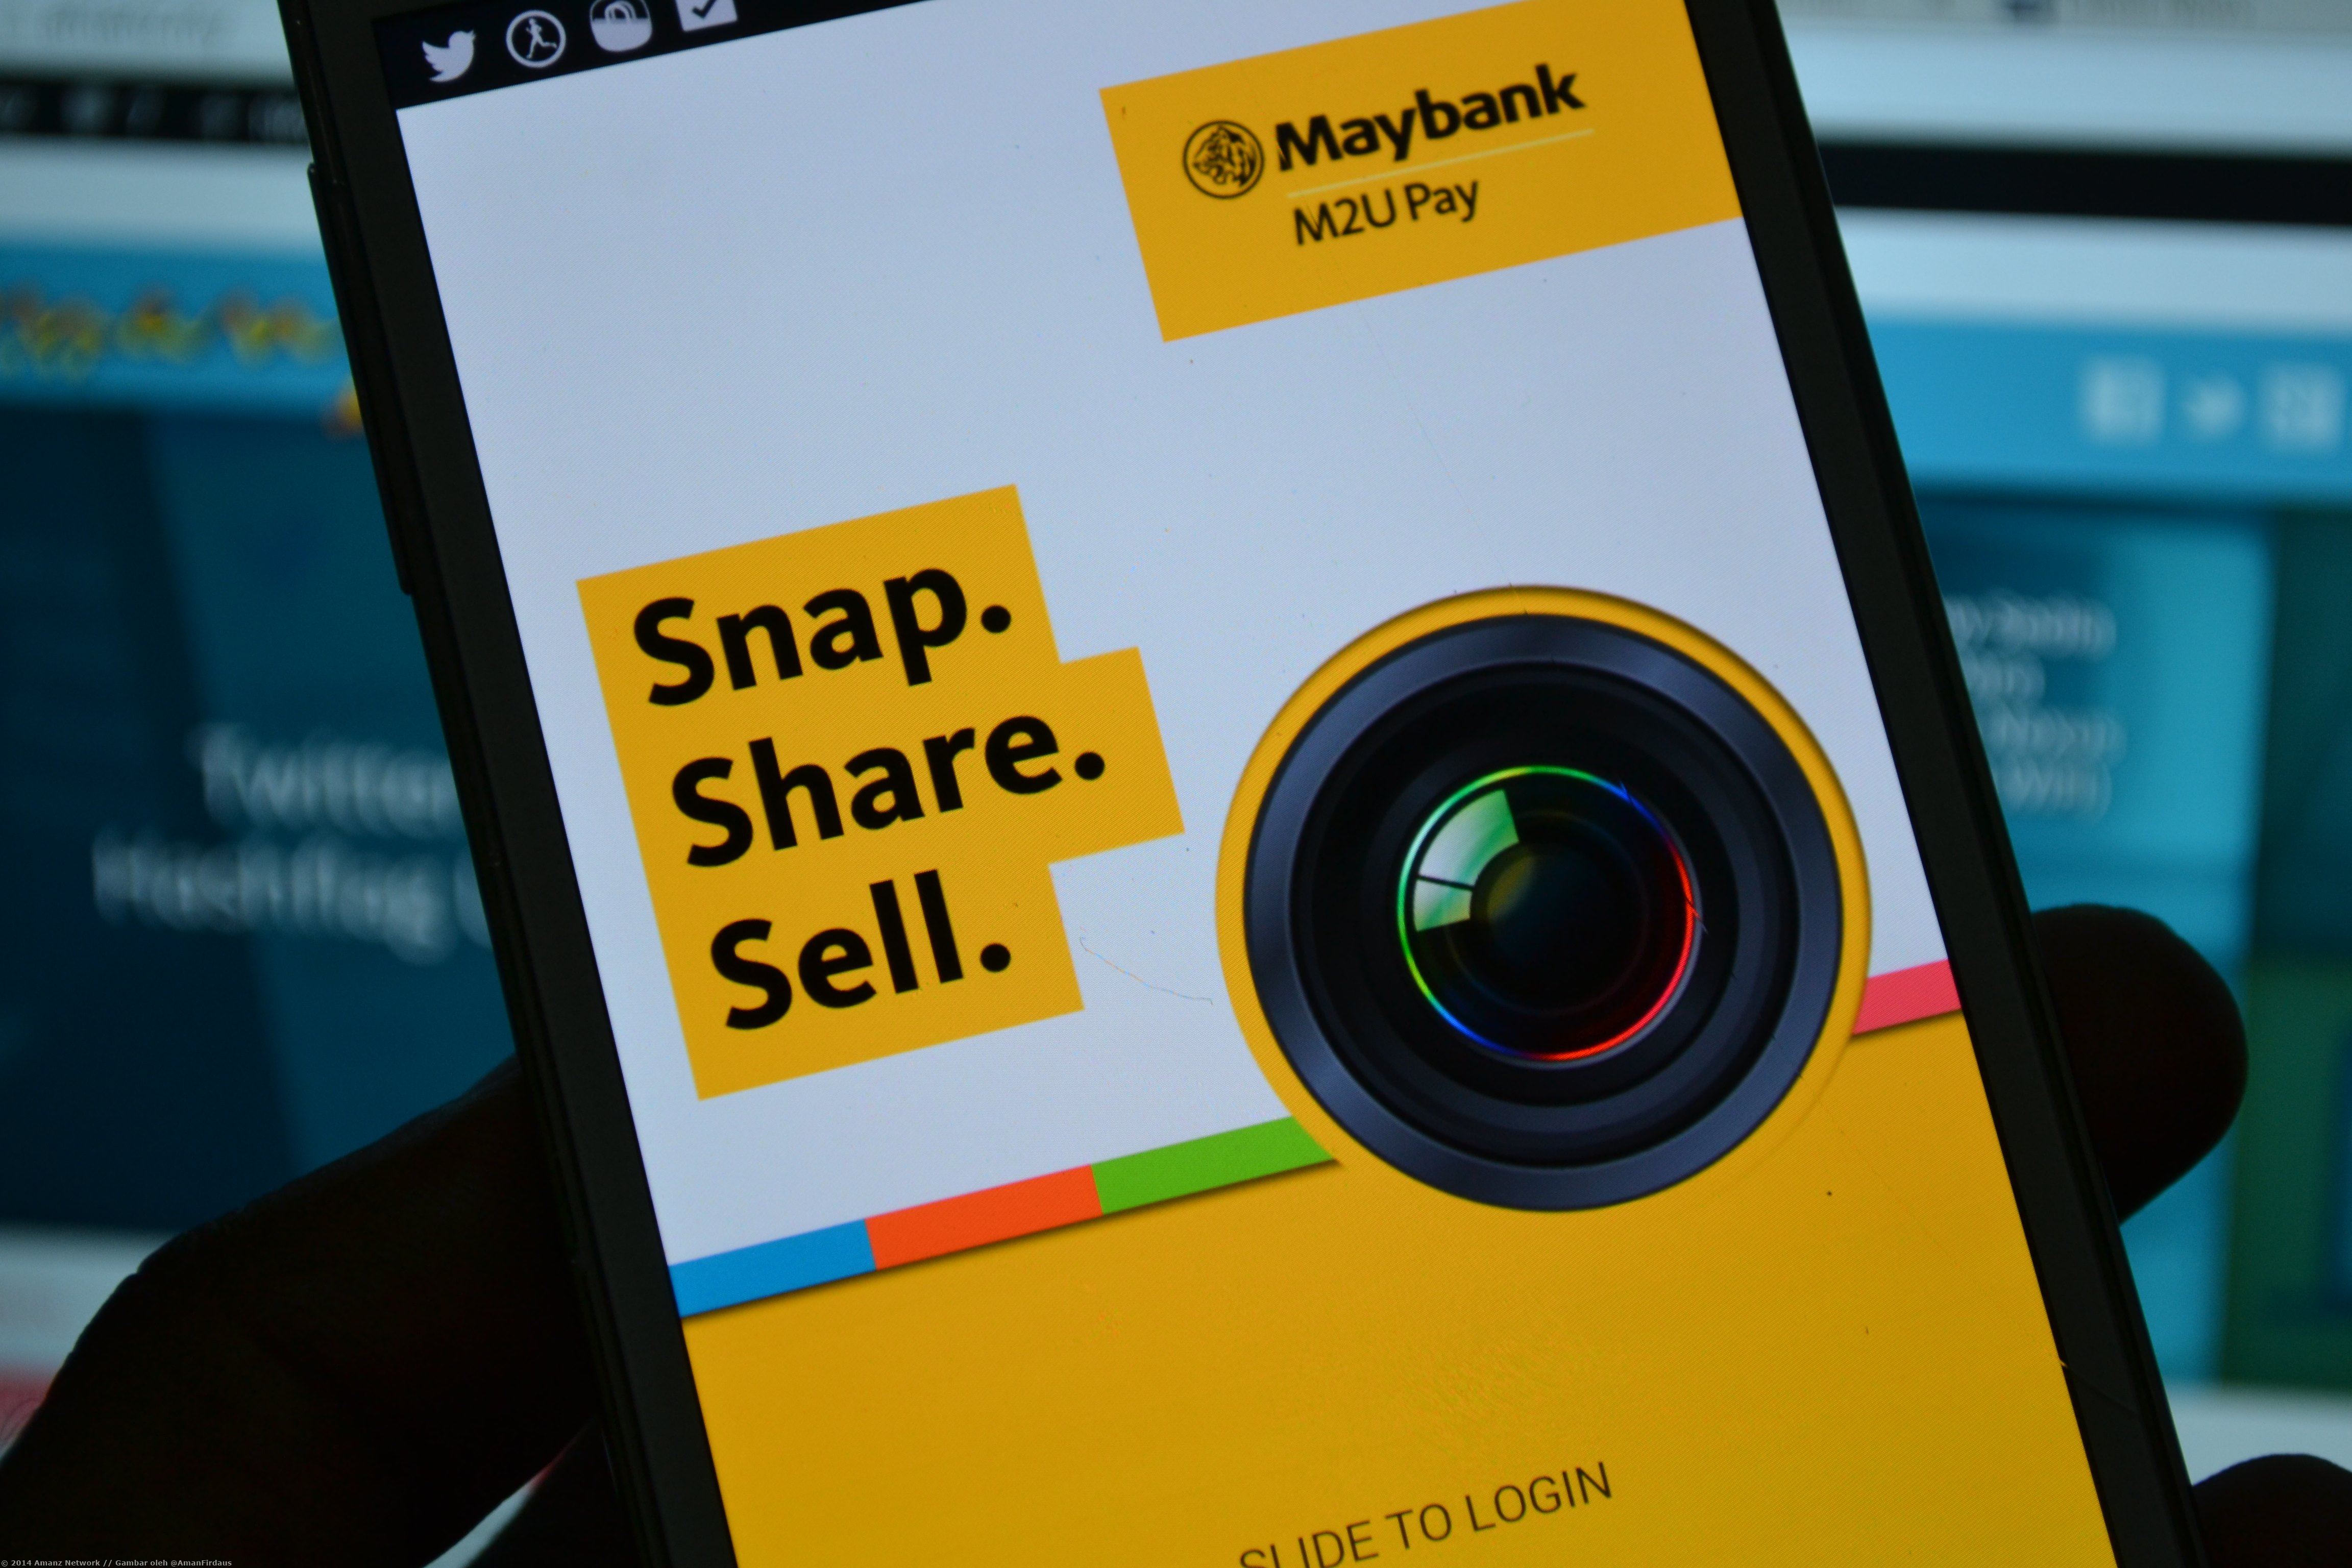 M2U Pay Snap & Sell